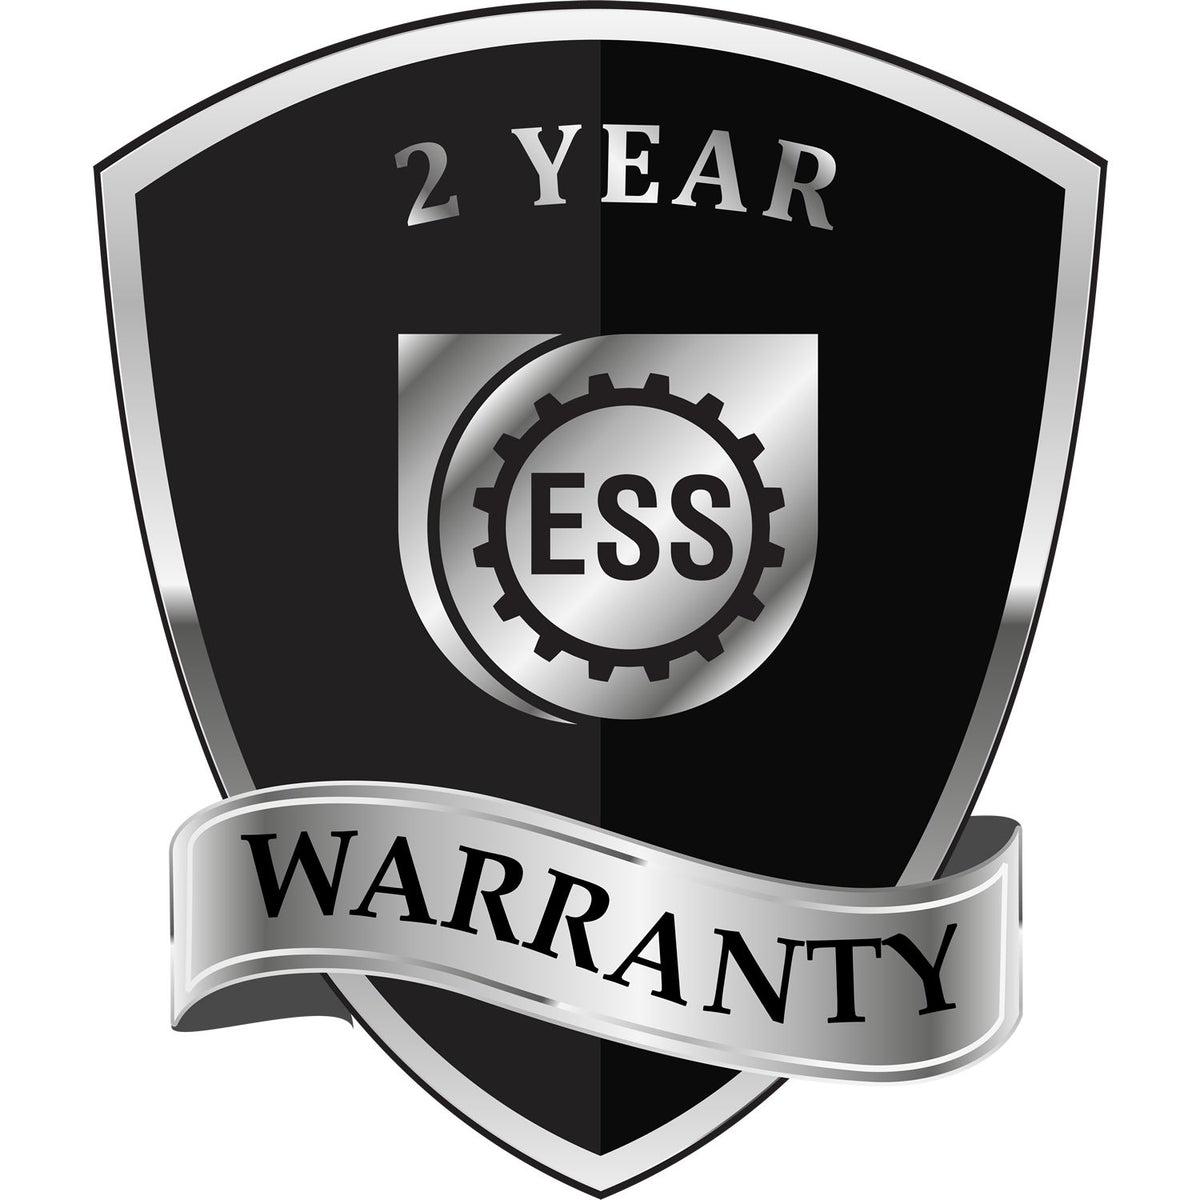 A black and silver badge or emblem showing warranty information for the Heavy Duty Cast Iron Kentucky Geologist Seal Embosser